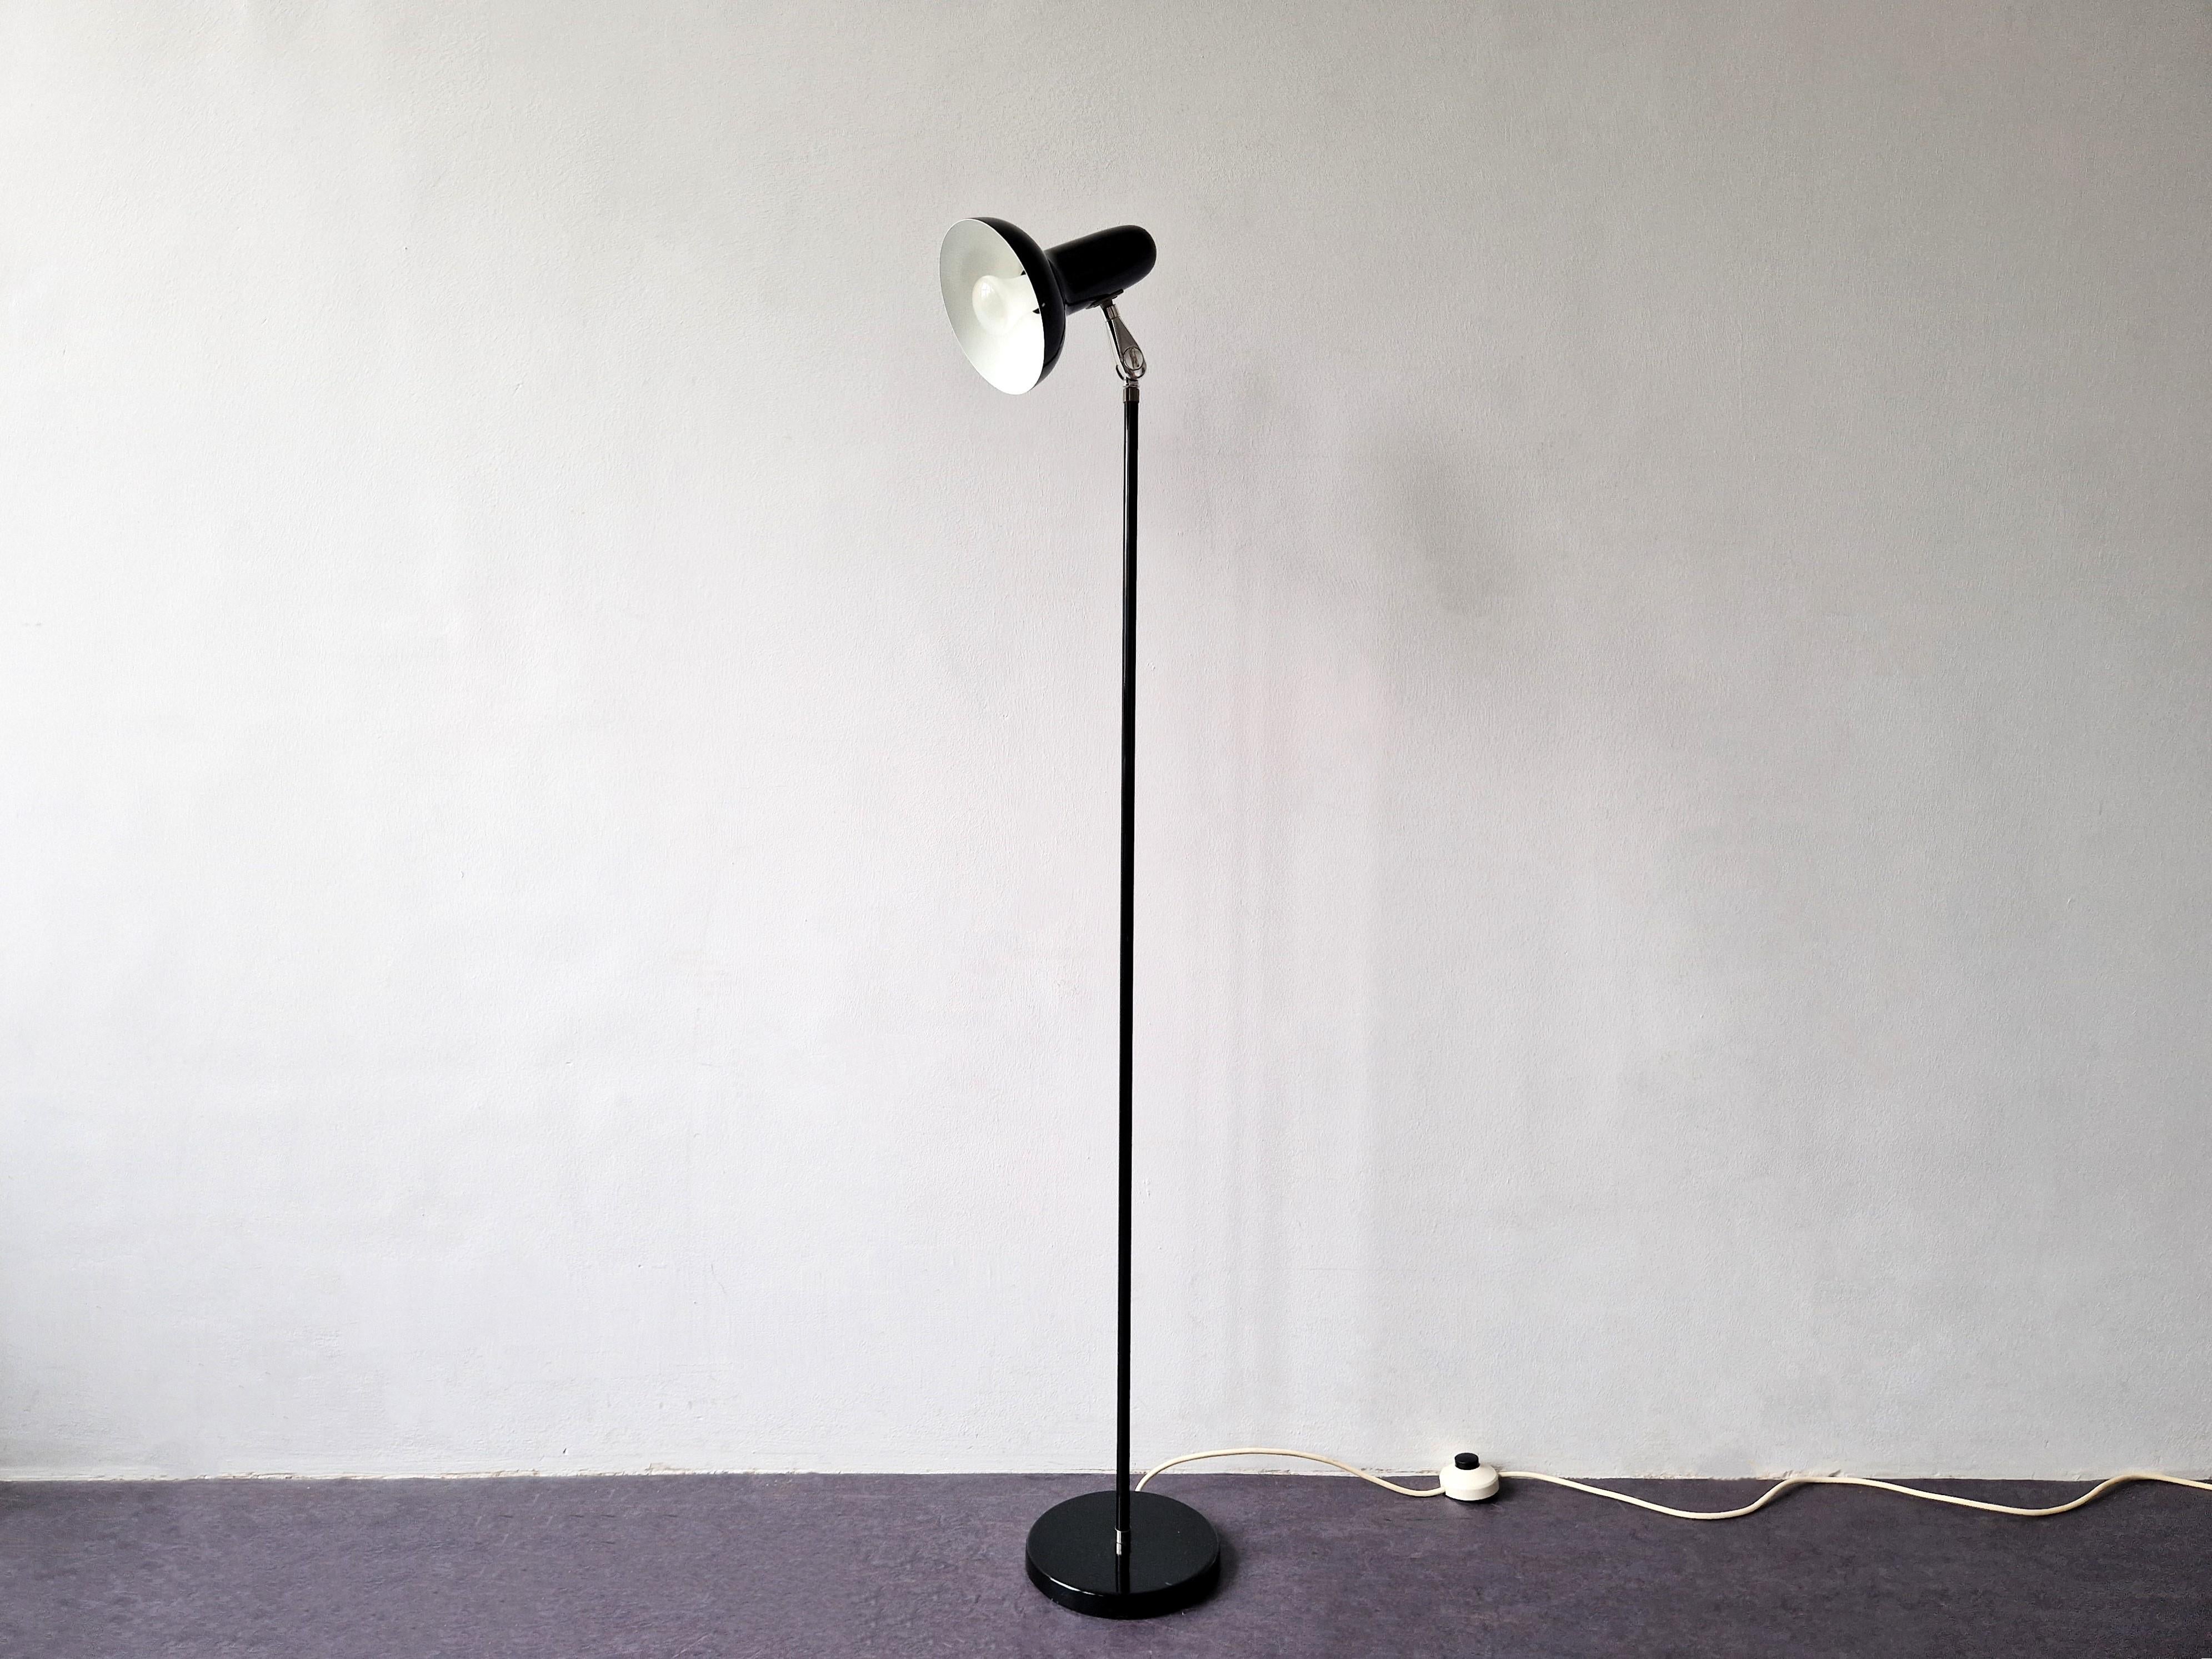 This rare black lacquered floor lamp, model 5427, was designed for Hagoort in the 1970's. It has an adjustable shade that makes it perfect for reading and bringing some atmospheric lighting into the room. The lamp is in a very good condition with